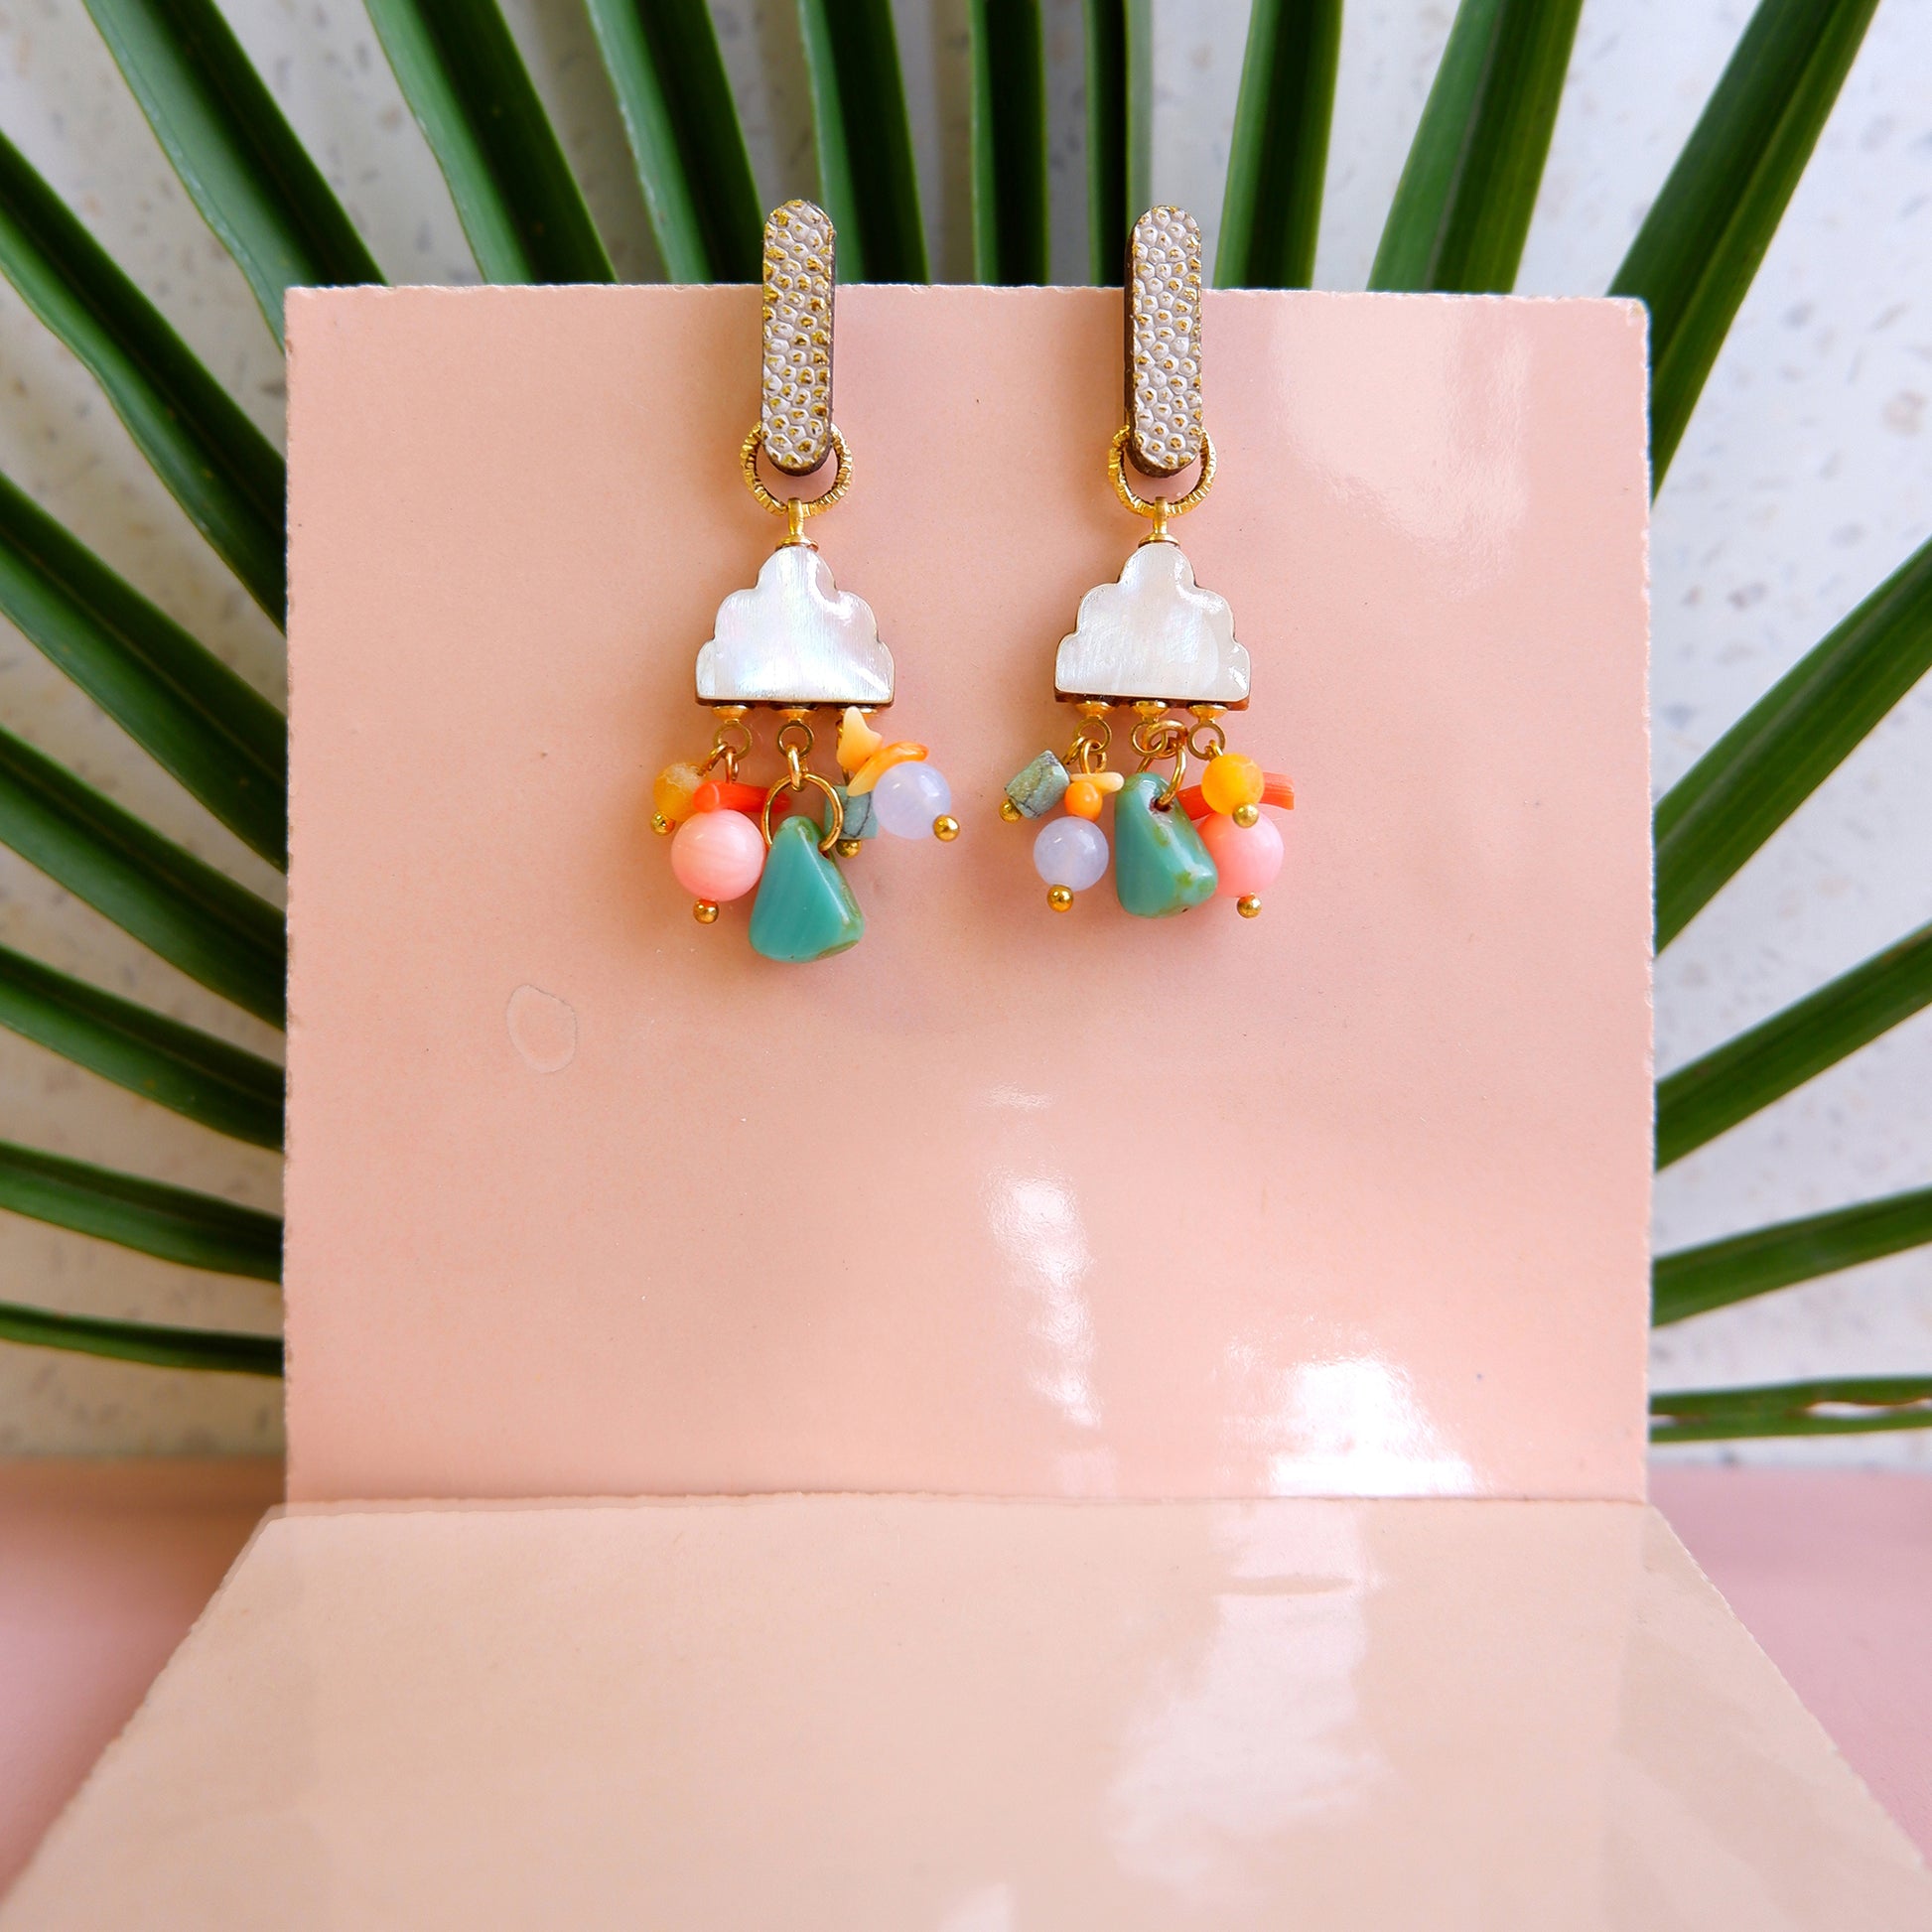 lacquered mother of pear charm drop earrings with rainbow mixed gemstone & glass beads, and sparkly leather studs, lifestyle still life